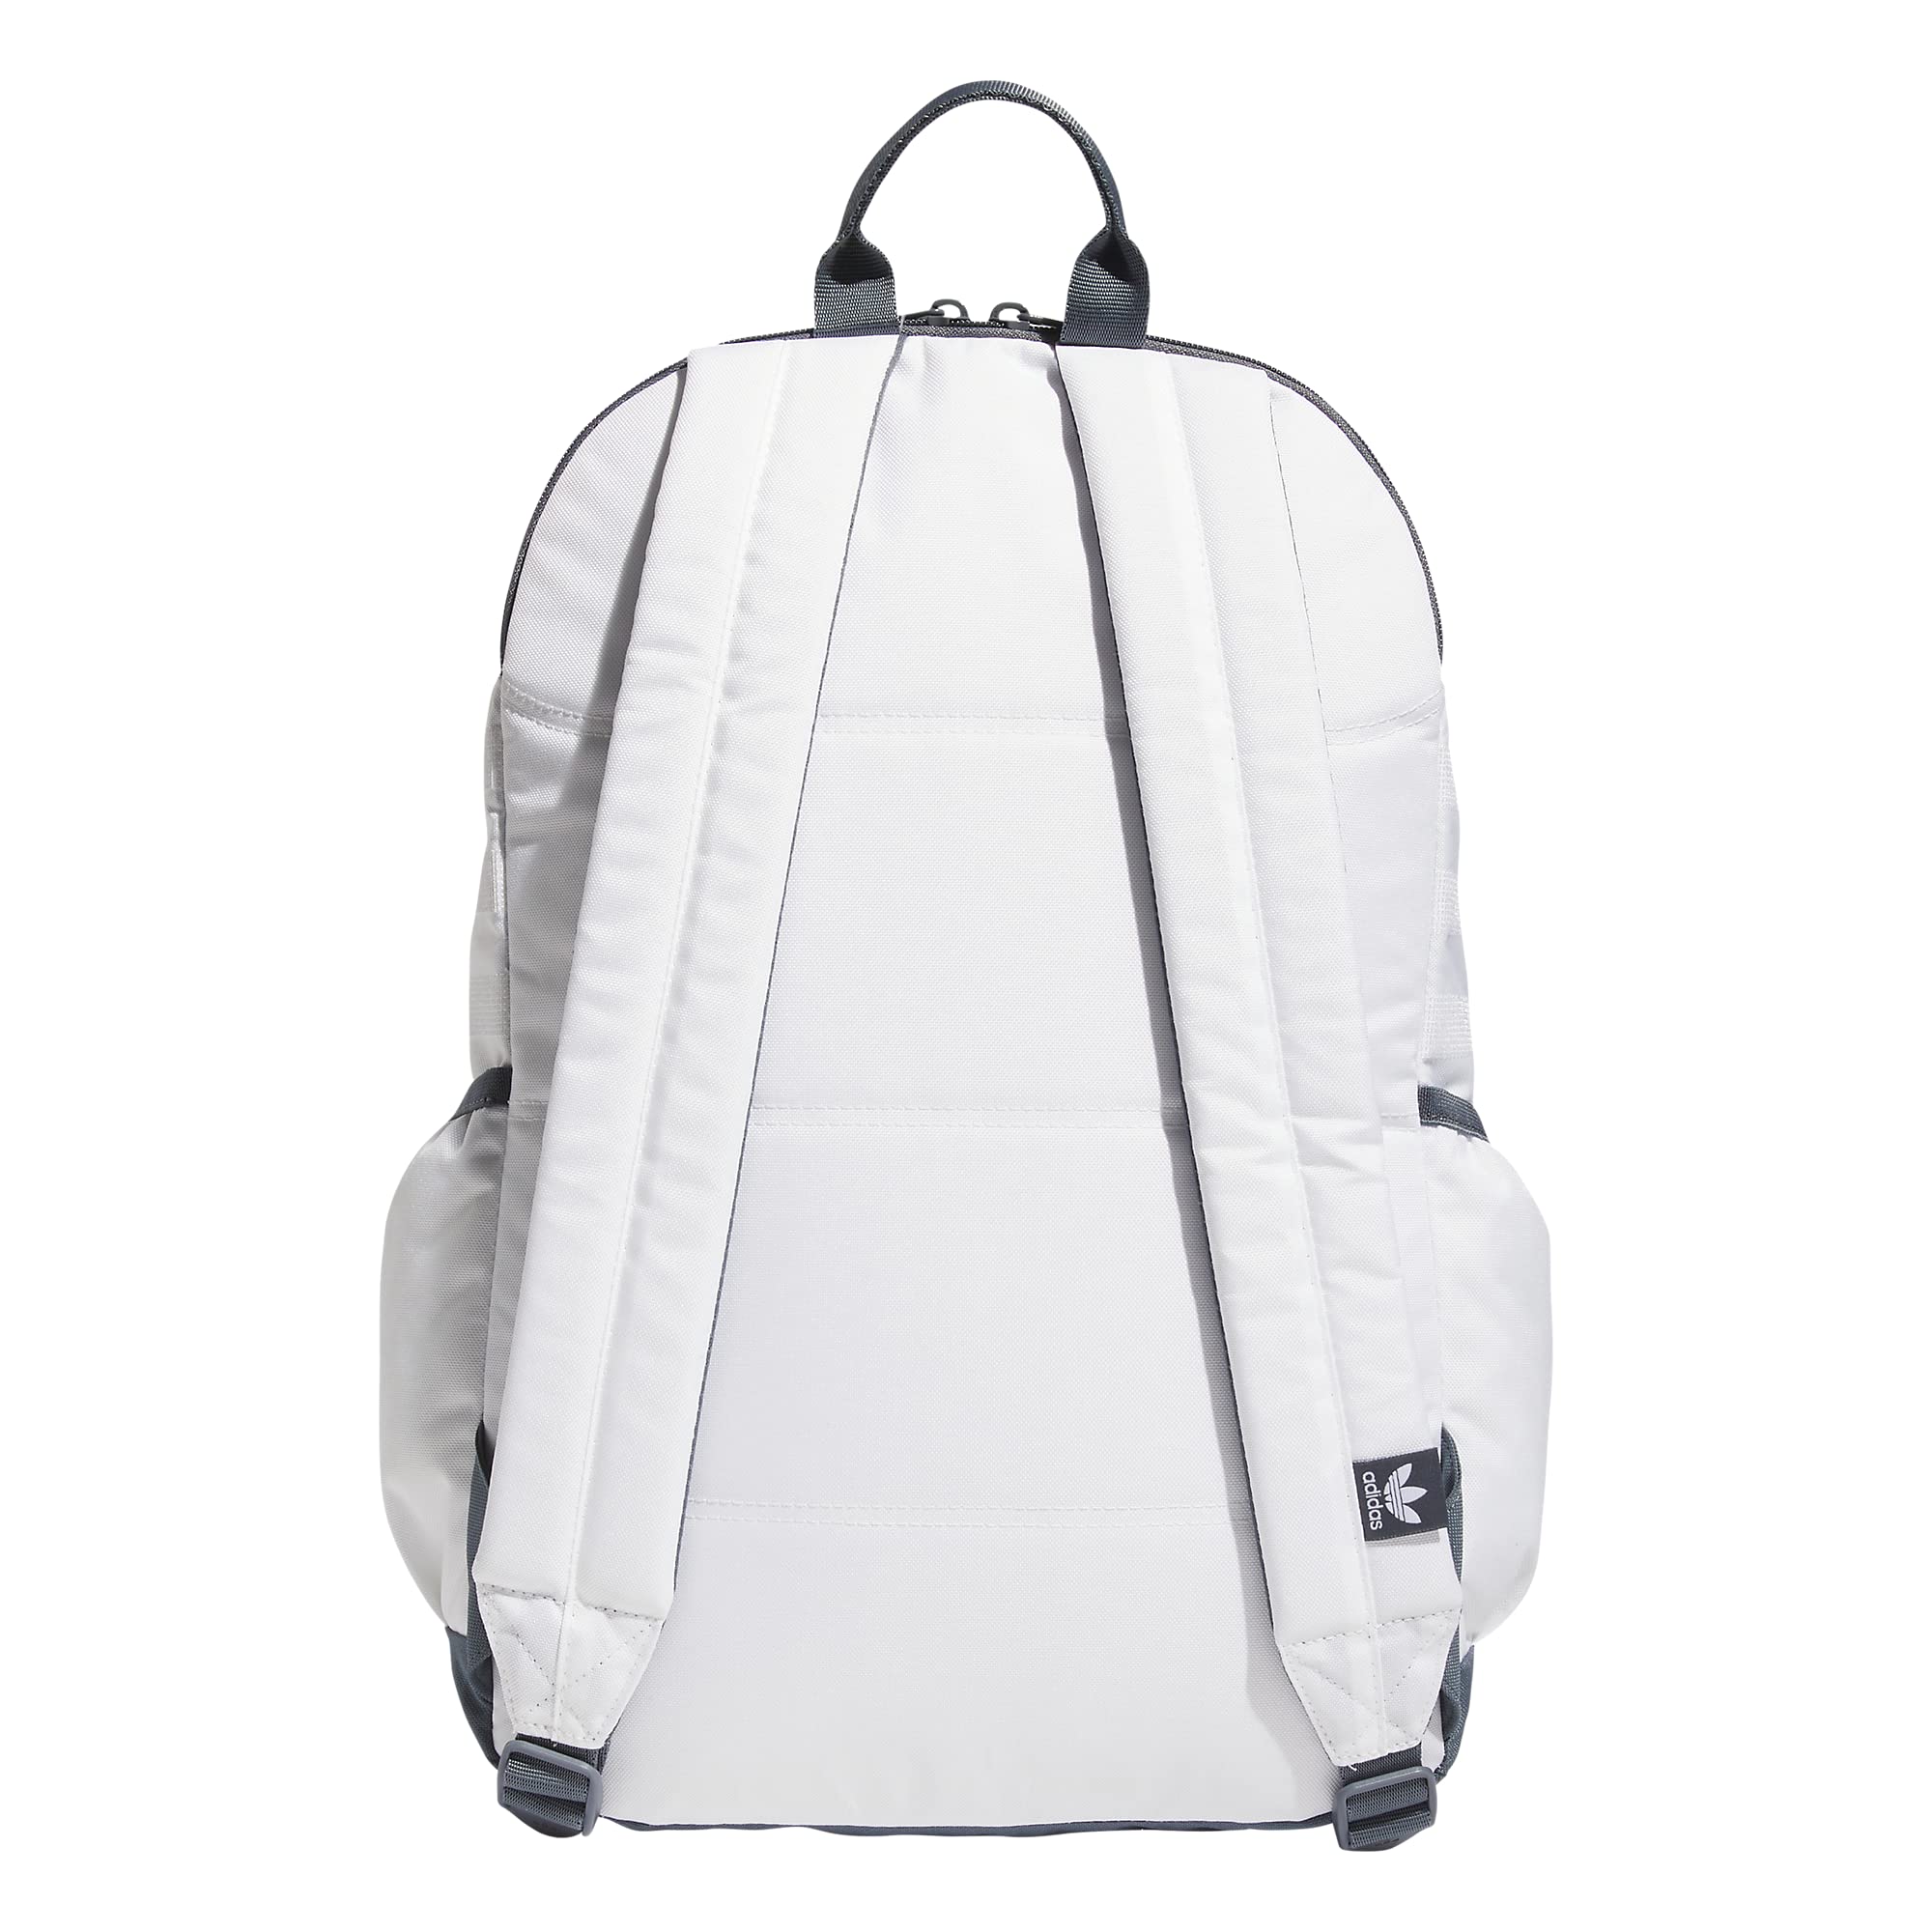 adidas Originals National 3.0 Backpack, White/Onix Grey/Bright Royal Blue, One Size